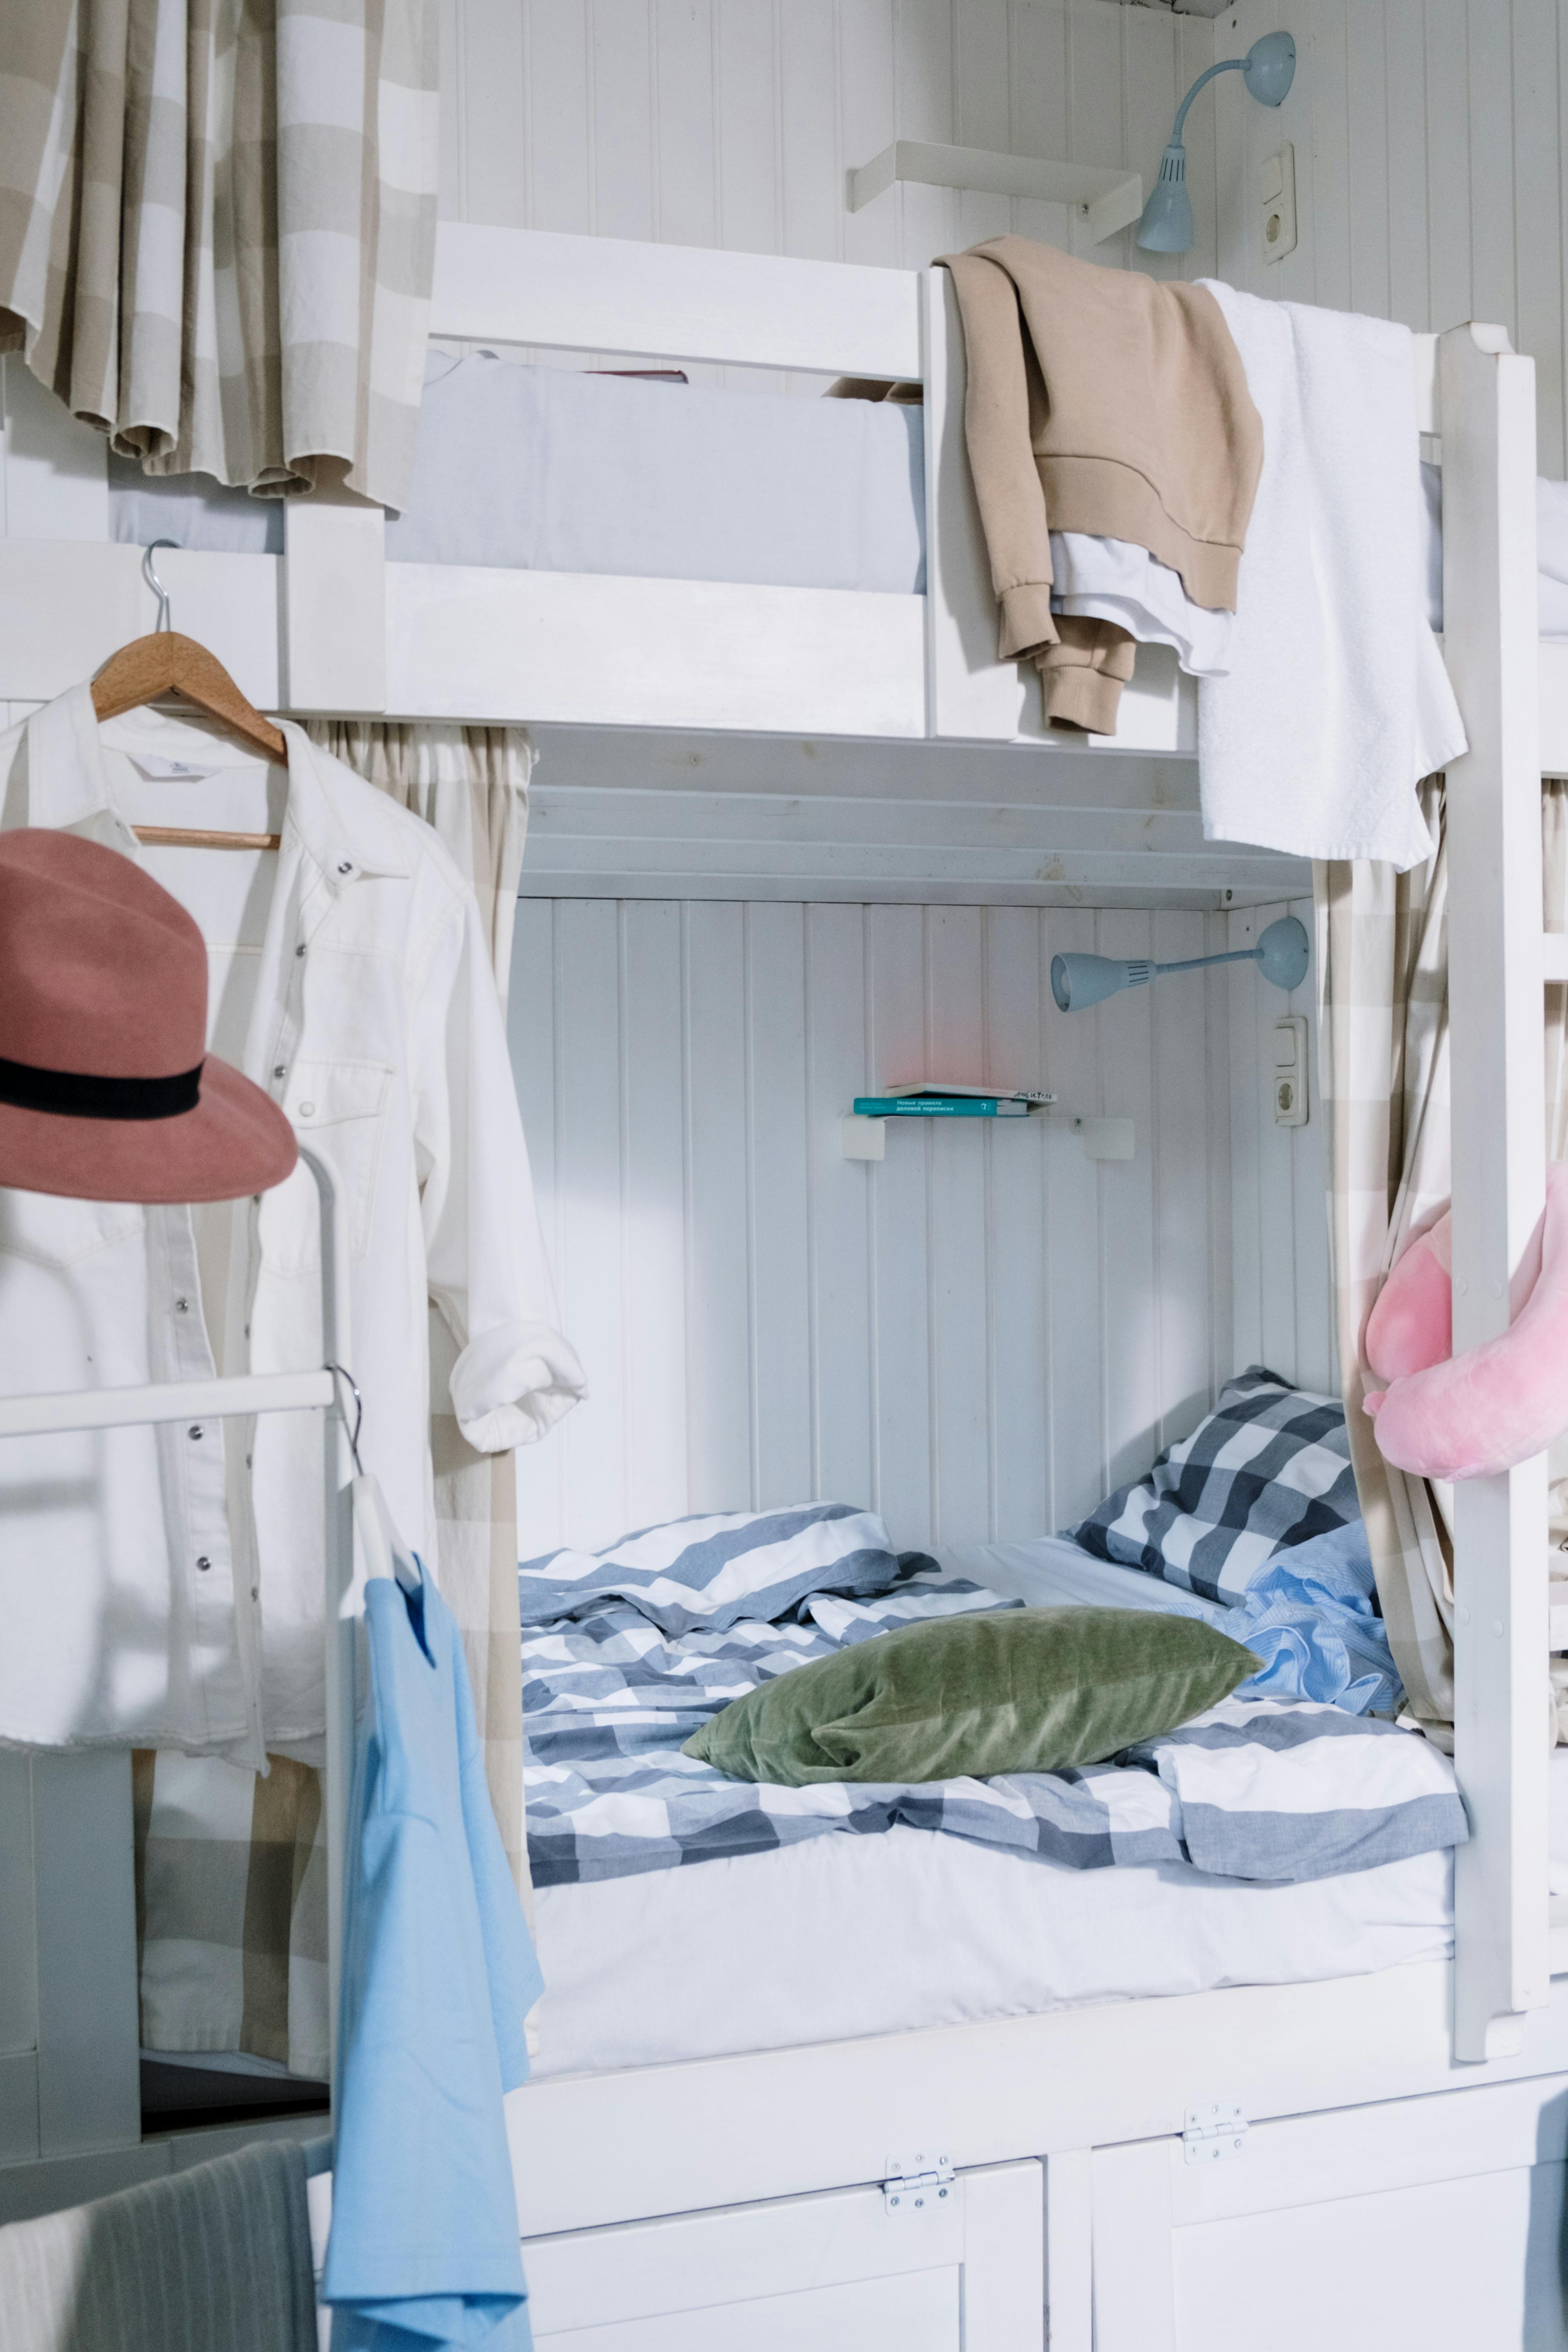 A Bunk Bed With Striped Linen Behind Bars · Free Stock Photo